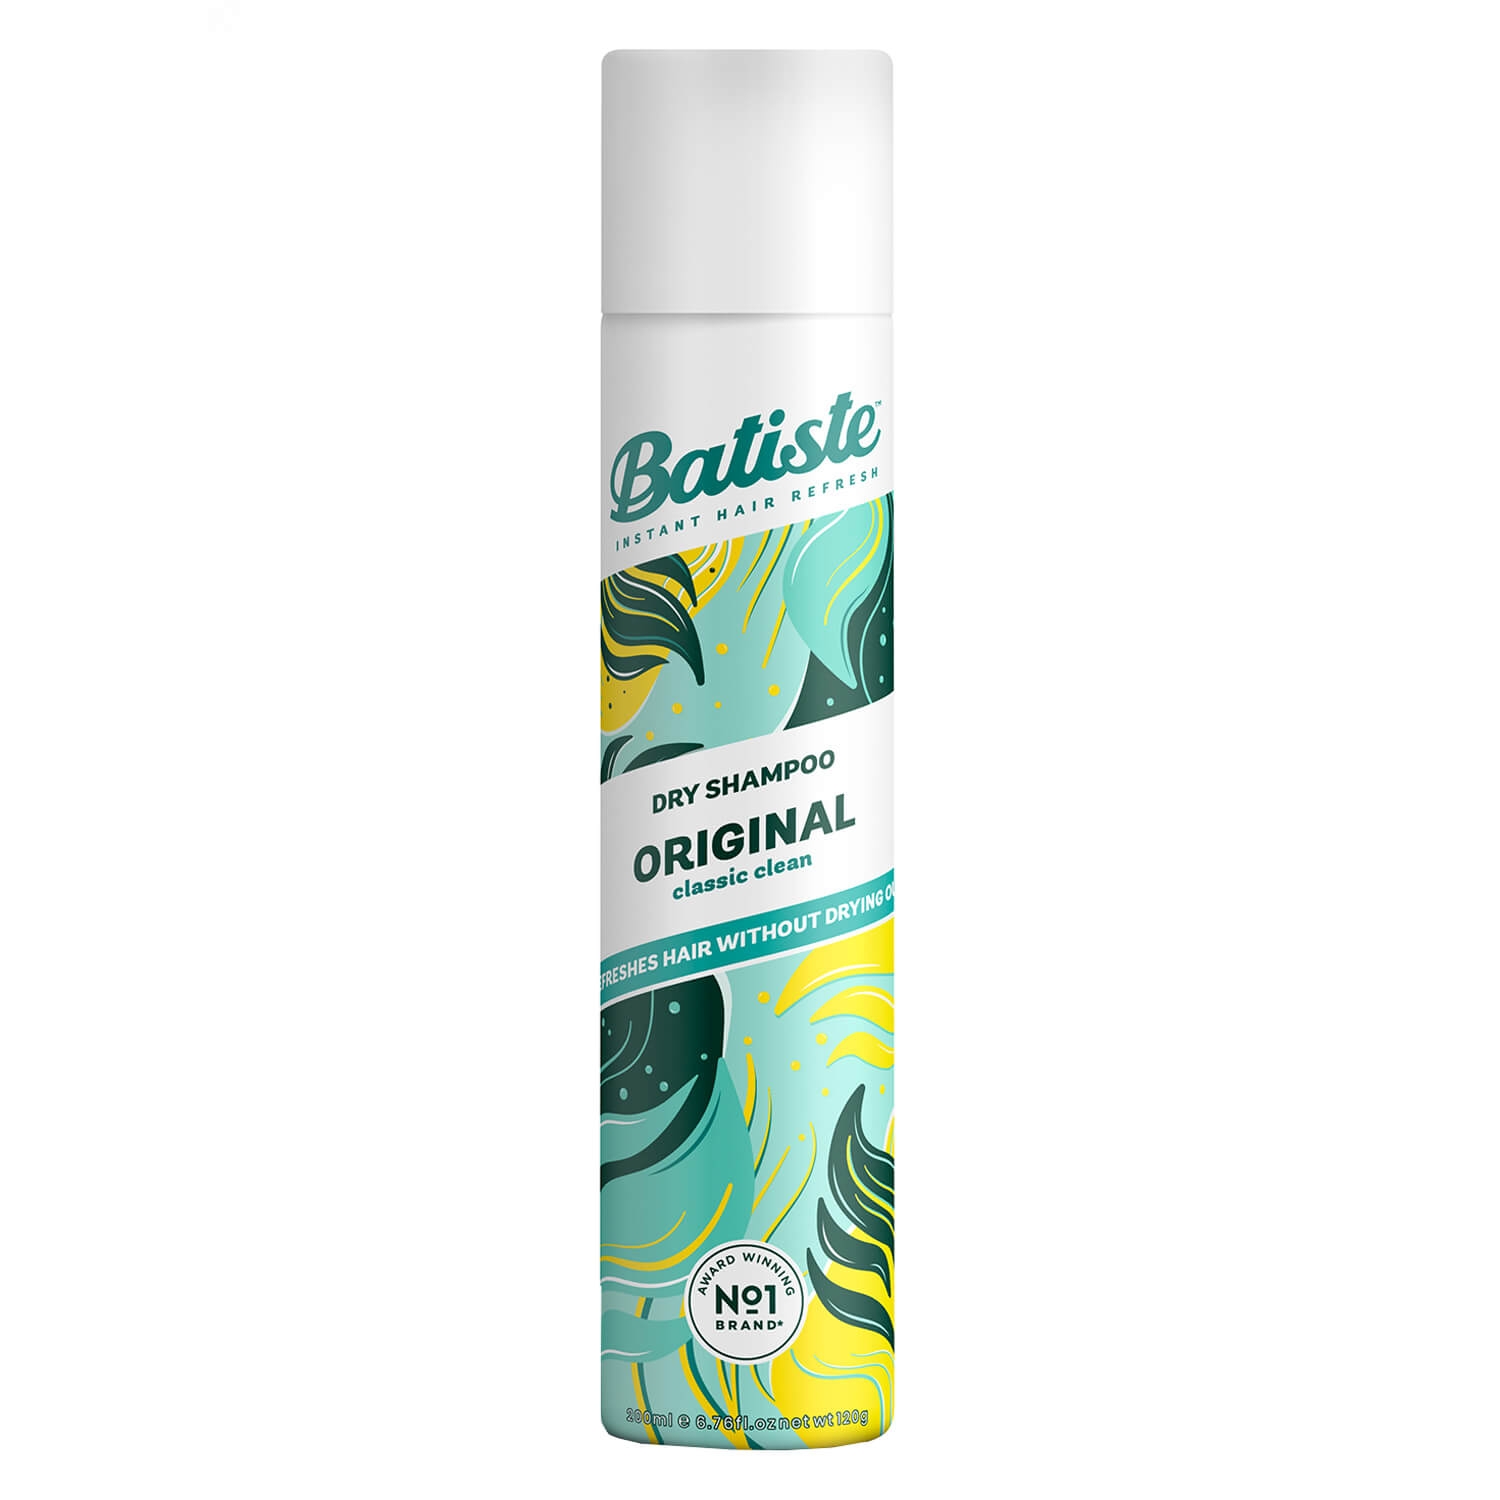 Product image from Batiste - Original